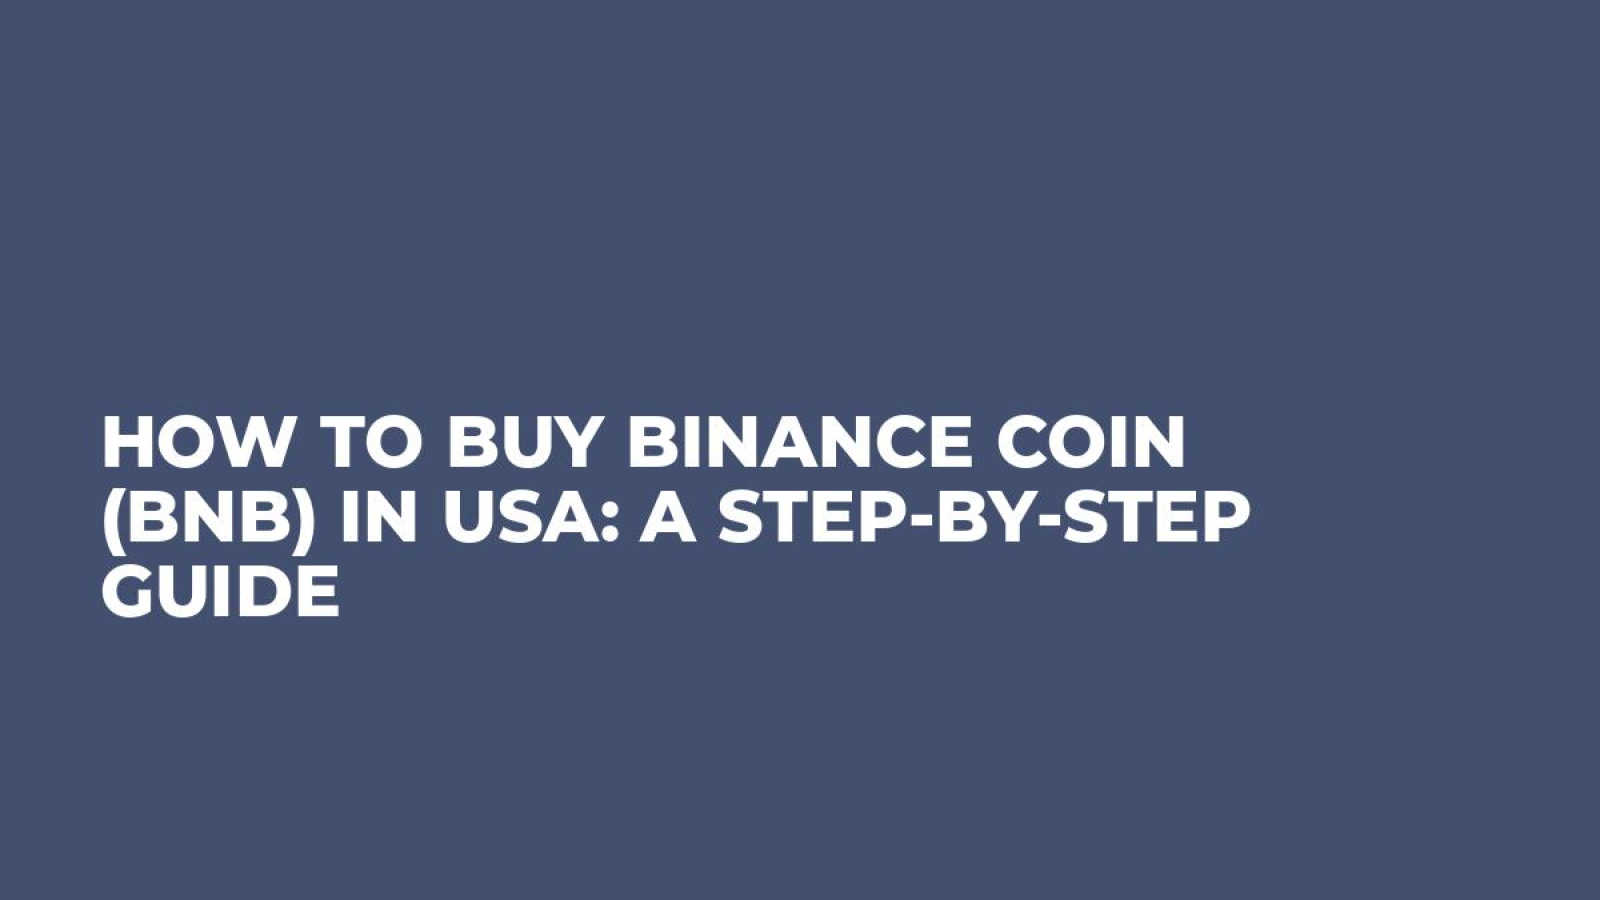 How to buy Binance Coin (BNB) in USA: A Step-by-Step Guide